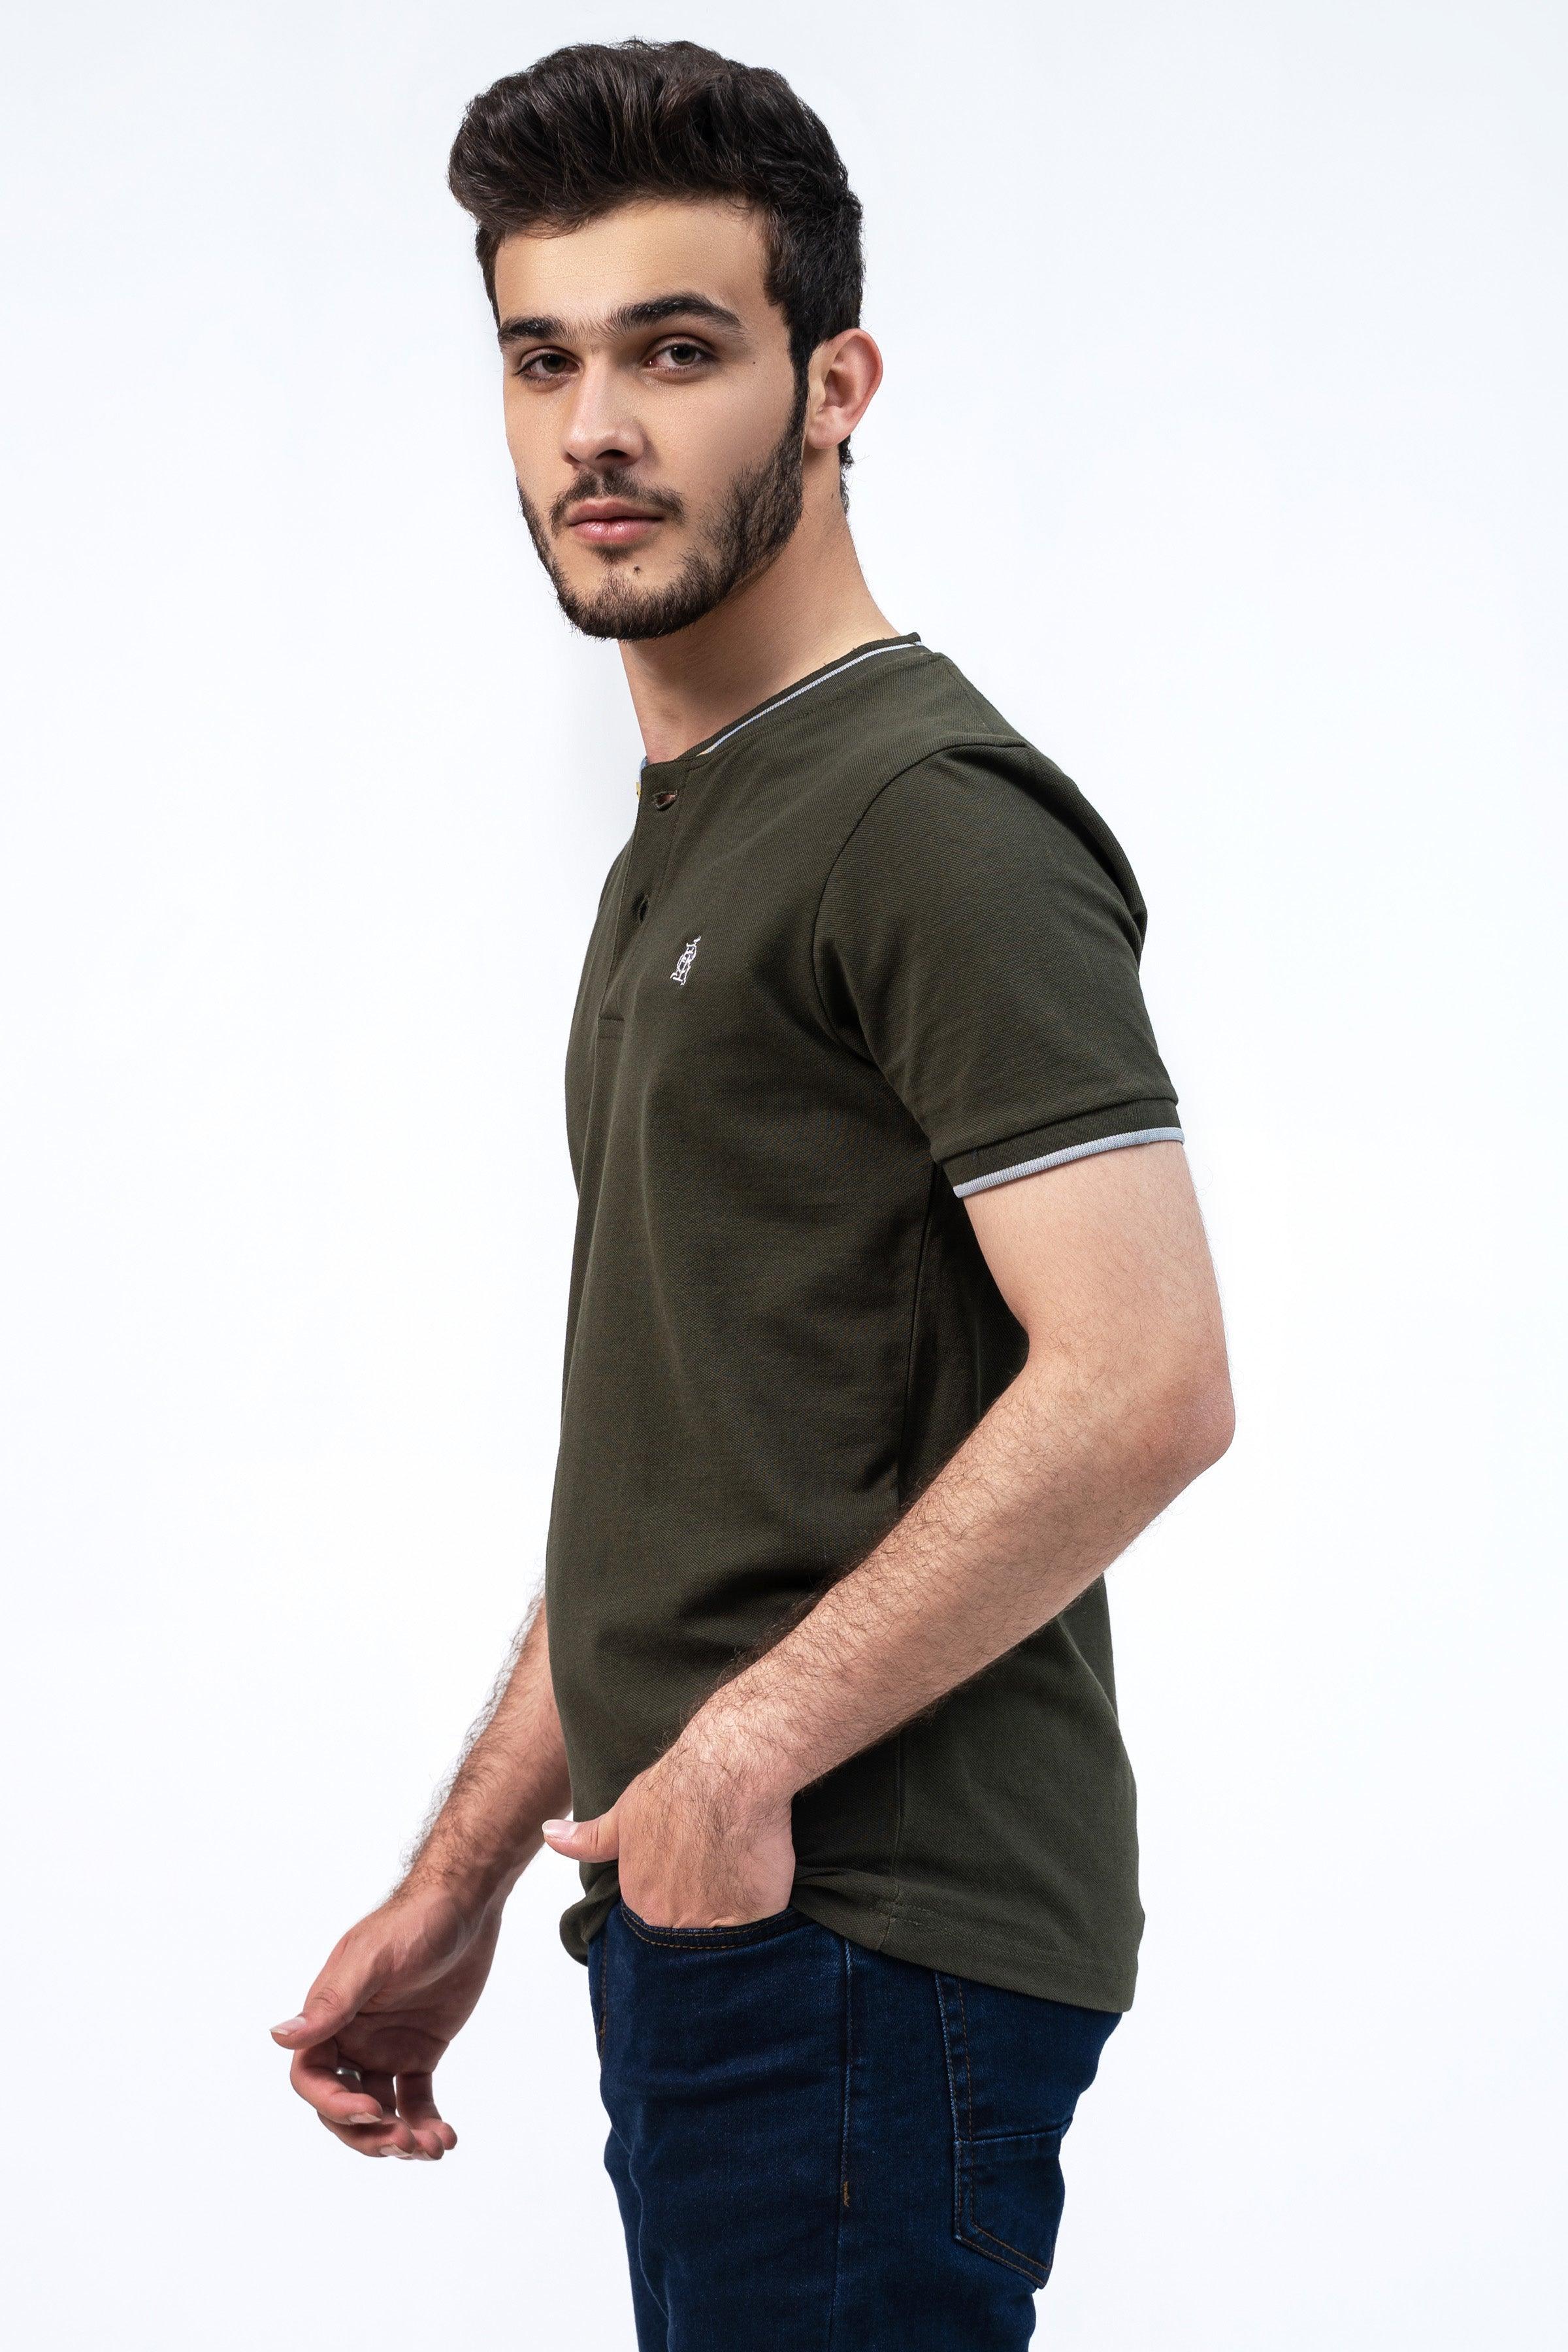 HENLEY T-SHIRT OLIVE GREEN at Charcoal Clothing